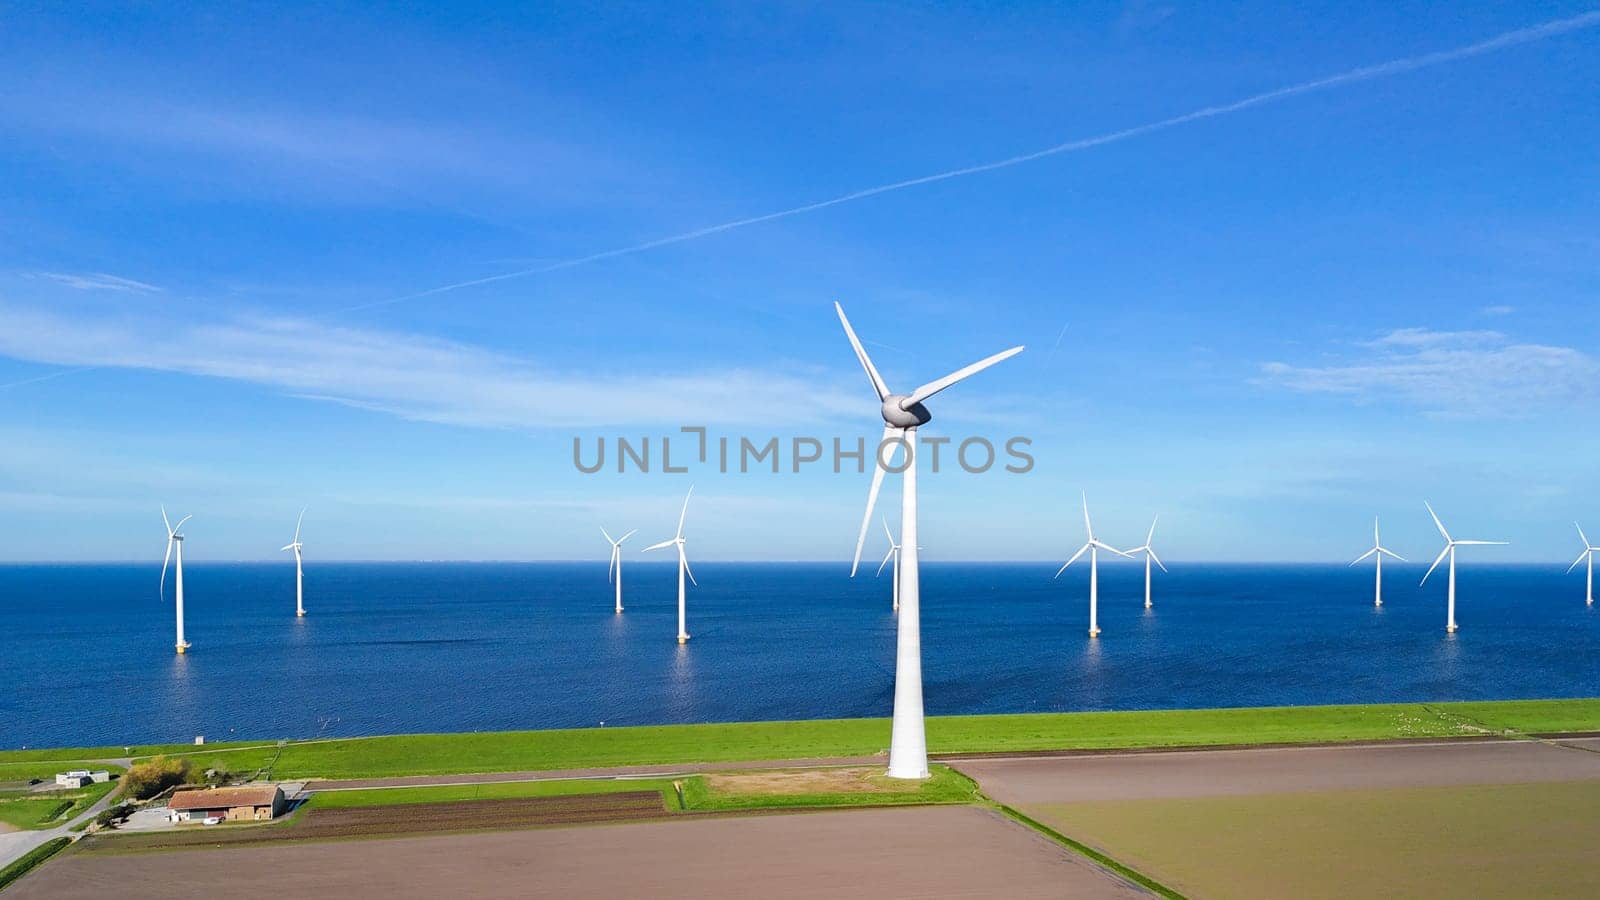 offshore windmill park and a blue sky, windmill park in the ocean. Netherlands Europe. windmill turbines in the Noordoostpolder Flevoland, clean green energy, carbon neutral, Earth day